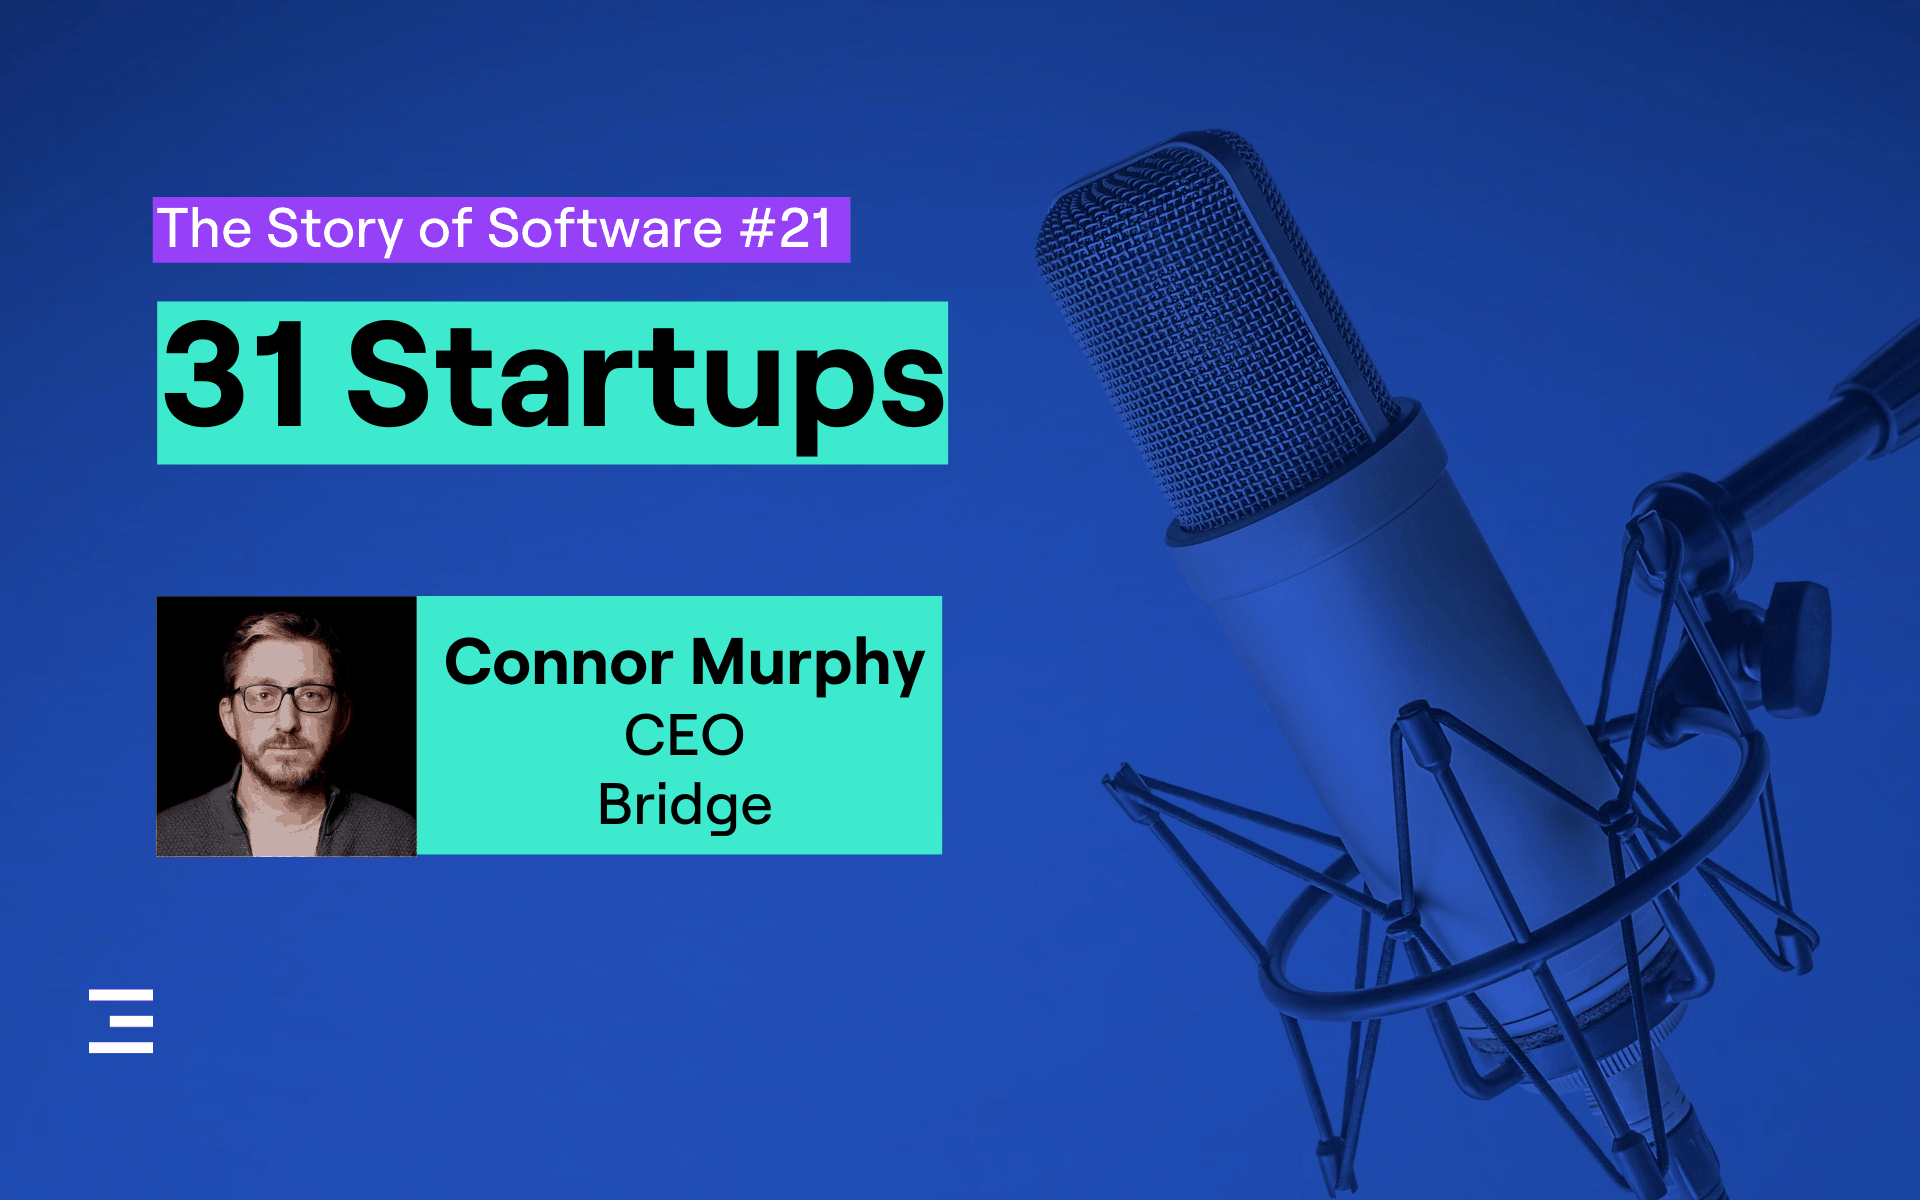 story of software podcast episode 21 - 31 startups with Connor Murphy and entrepreneurship